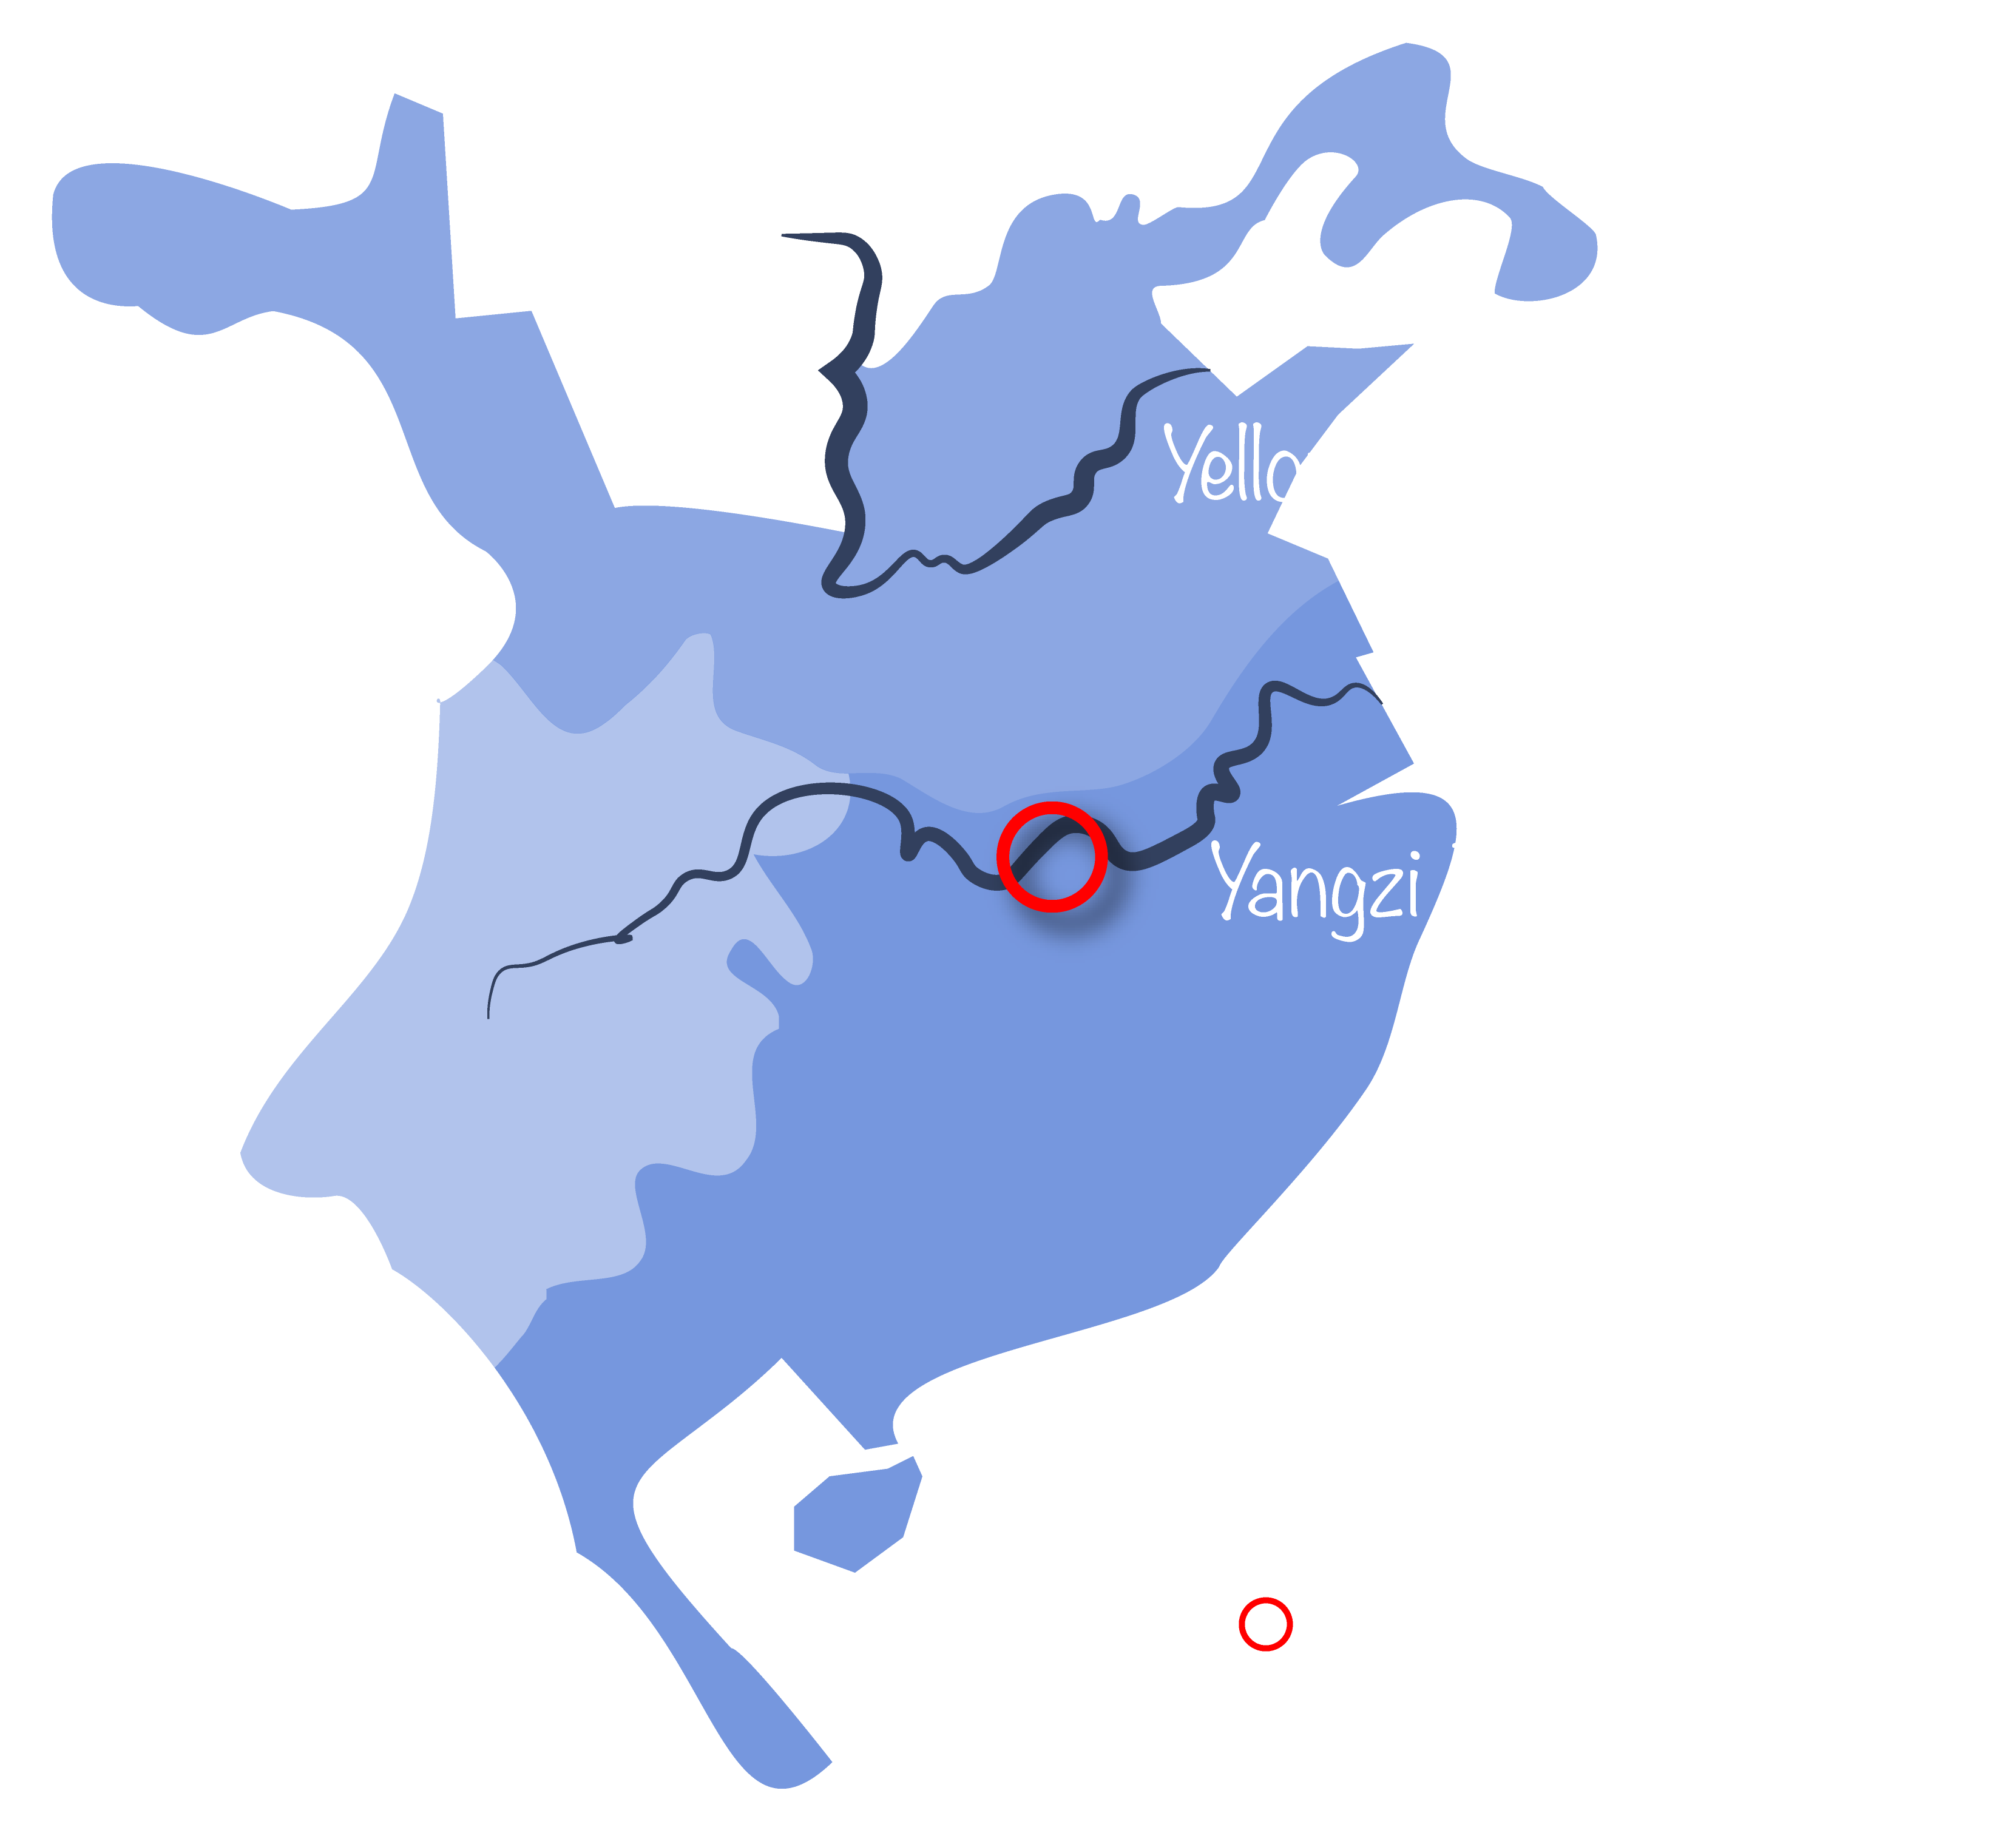 Simple map showing the location of the Yellow River, the Yangzi River, the putative site of the Battle of Red Cliff and what would later become the Three Kingdoms